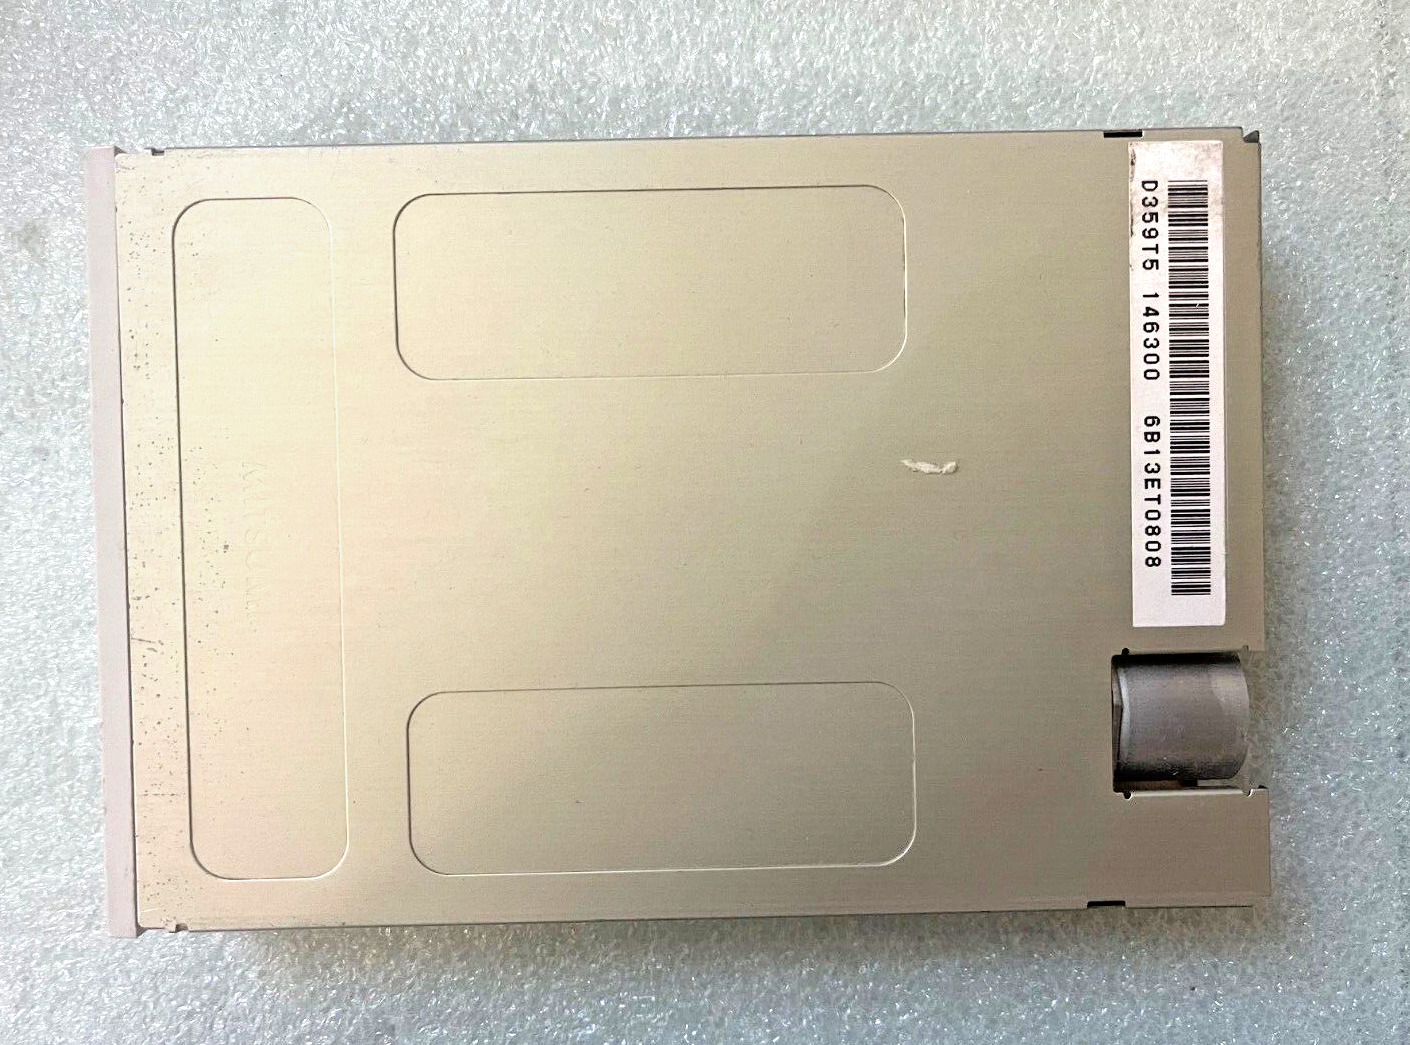 TESTED PULLS MITSUMI D359T5 1.44MB FLOPPY DISK DRIVE FULL FRONT FACE PLATE BXDR9